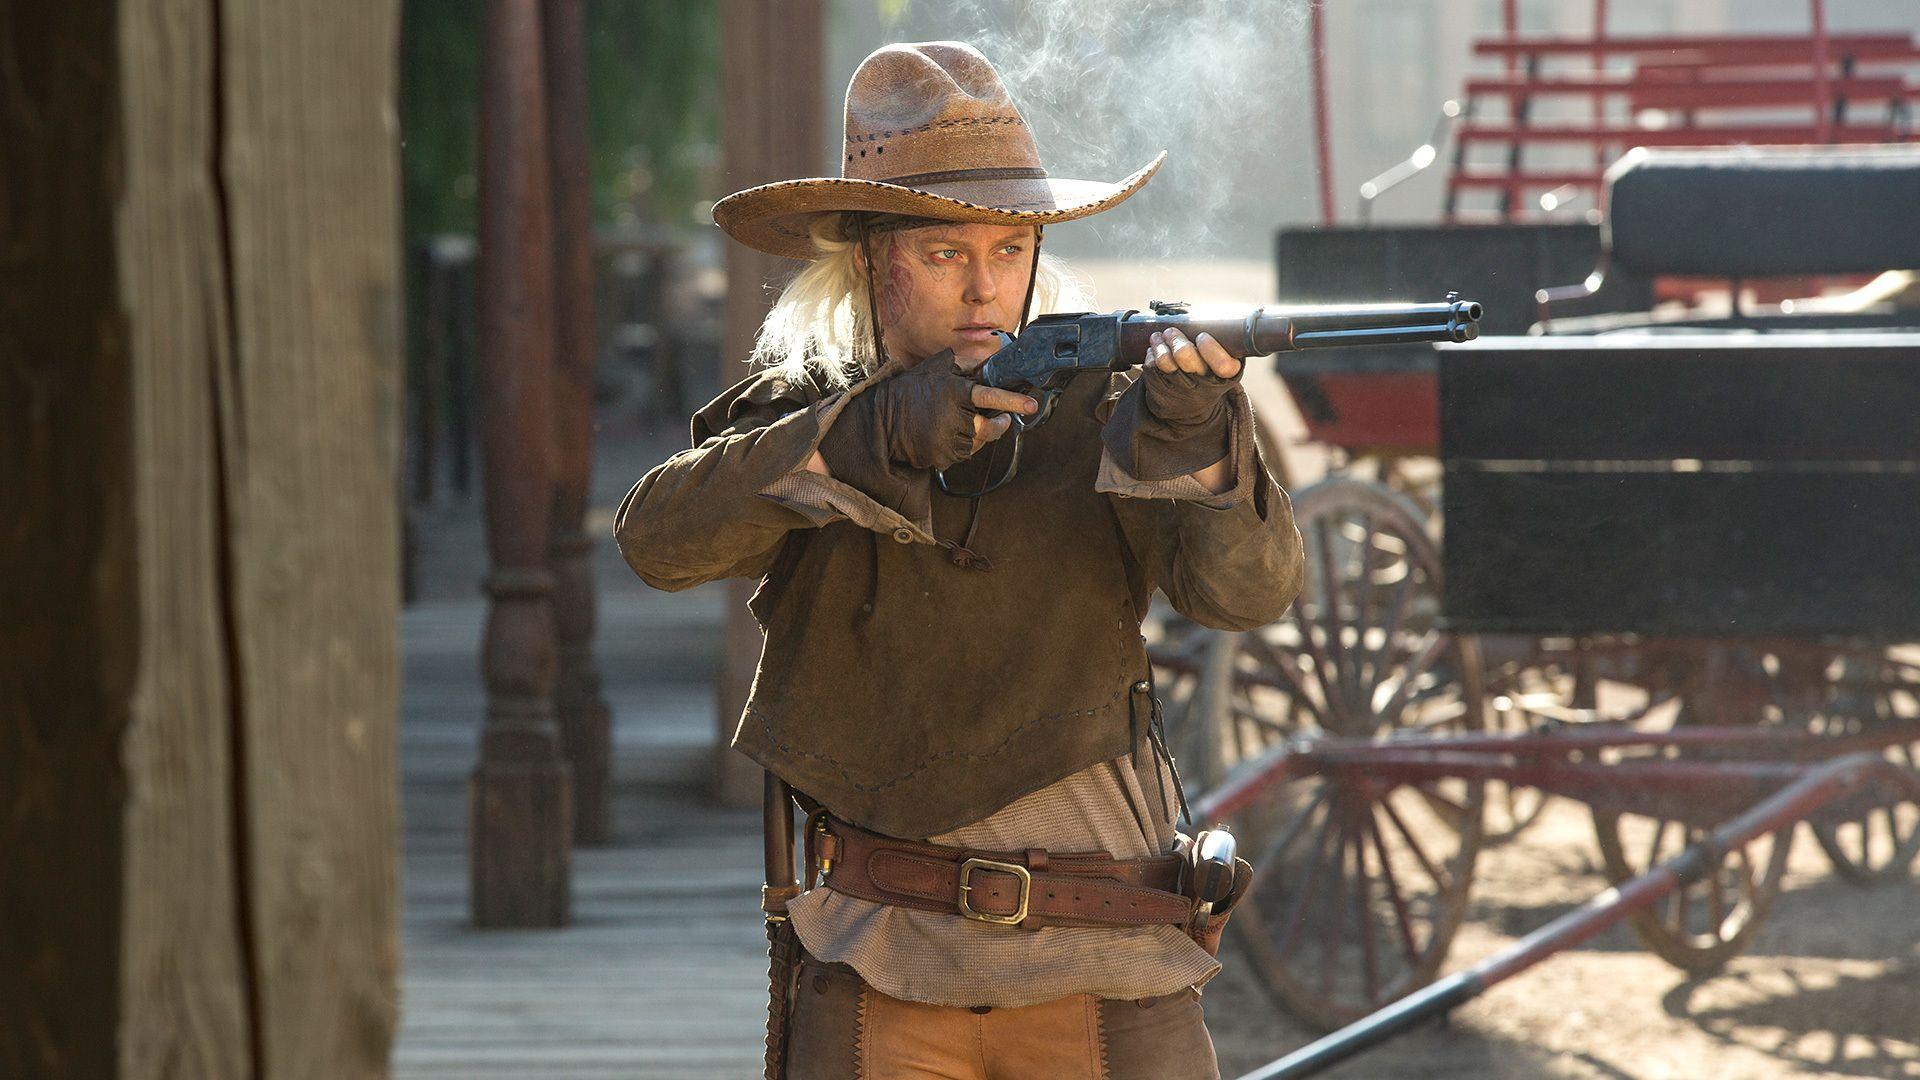 Westworld: Will We see More Of The Gunslinger Armistice In Season 2?